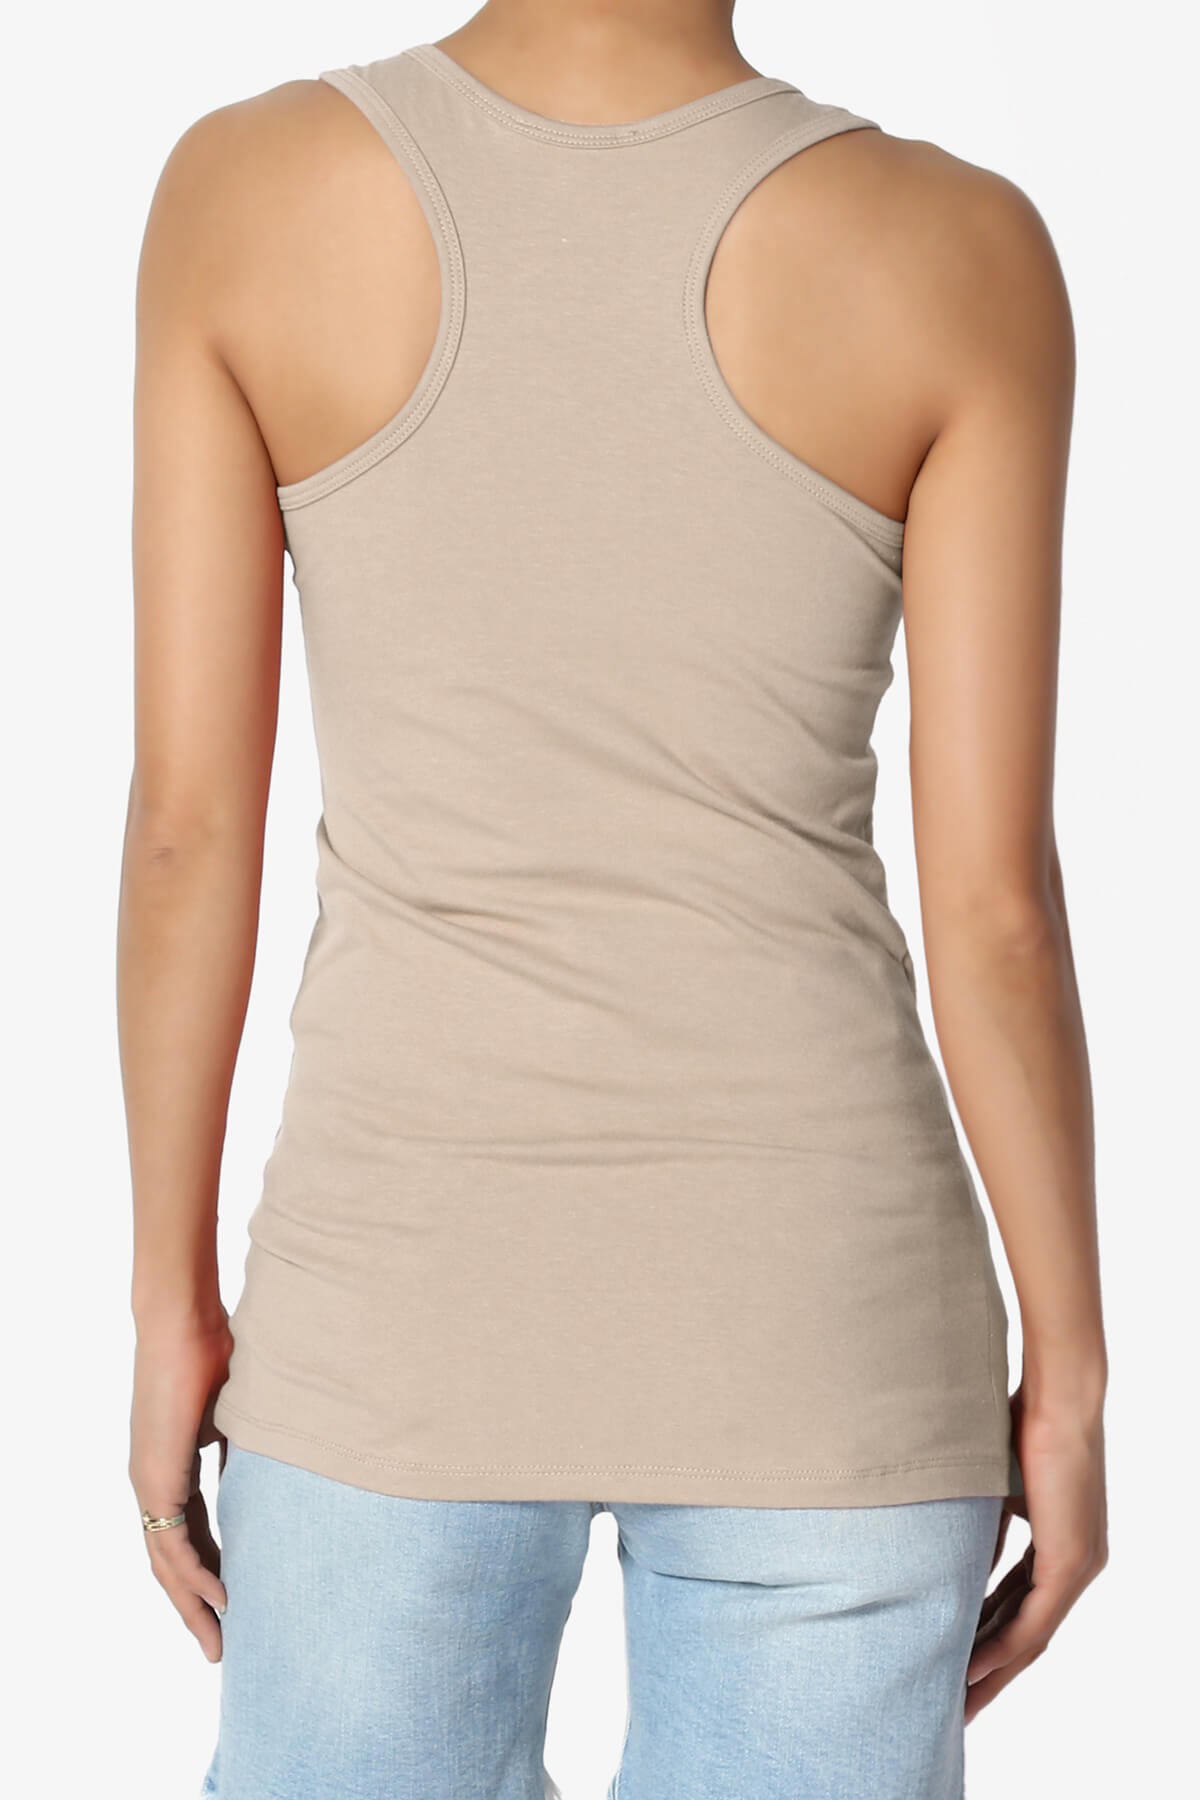 Load image into Gallery viewer, Marnie Racerback Tank Top LIGHT MOCHA_2
